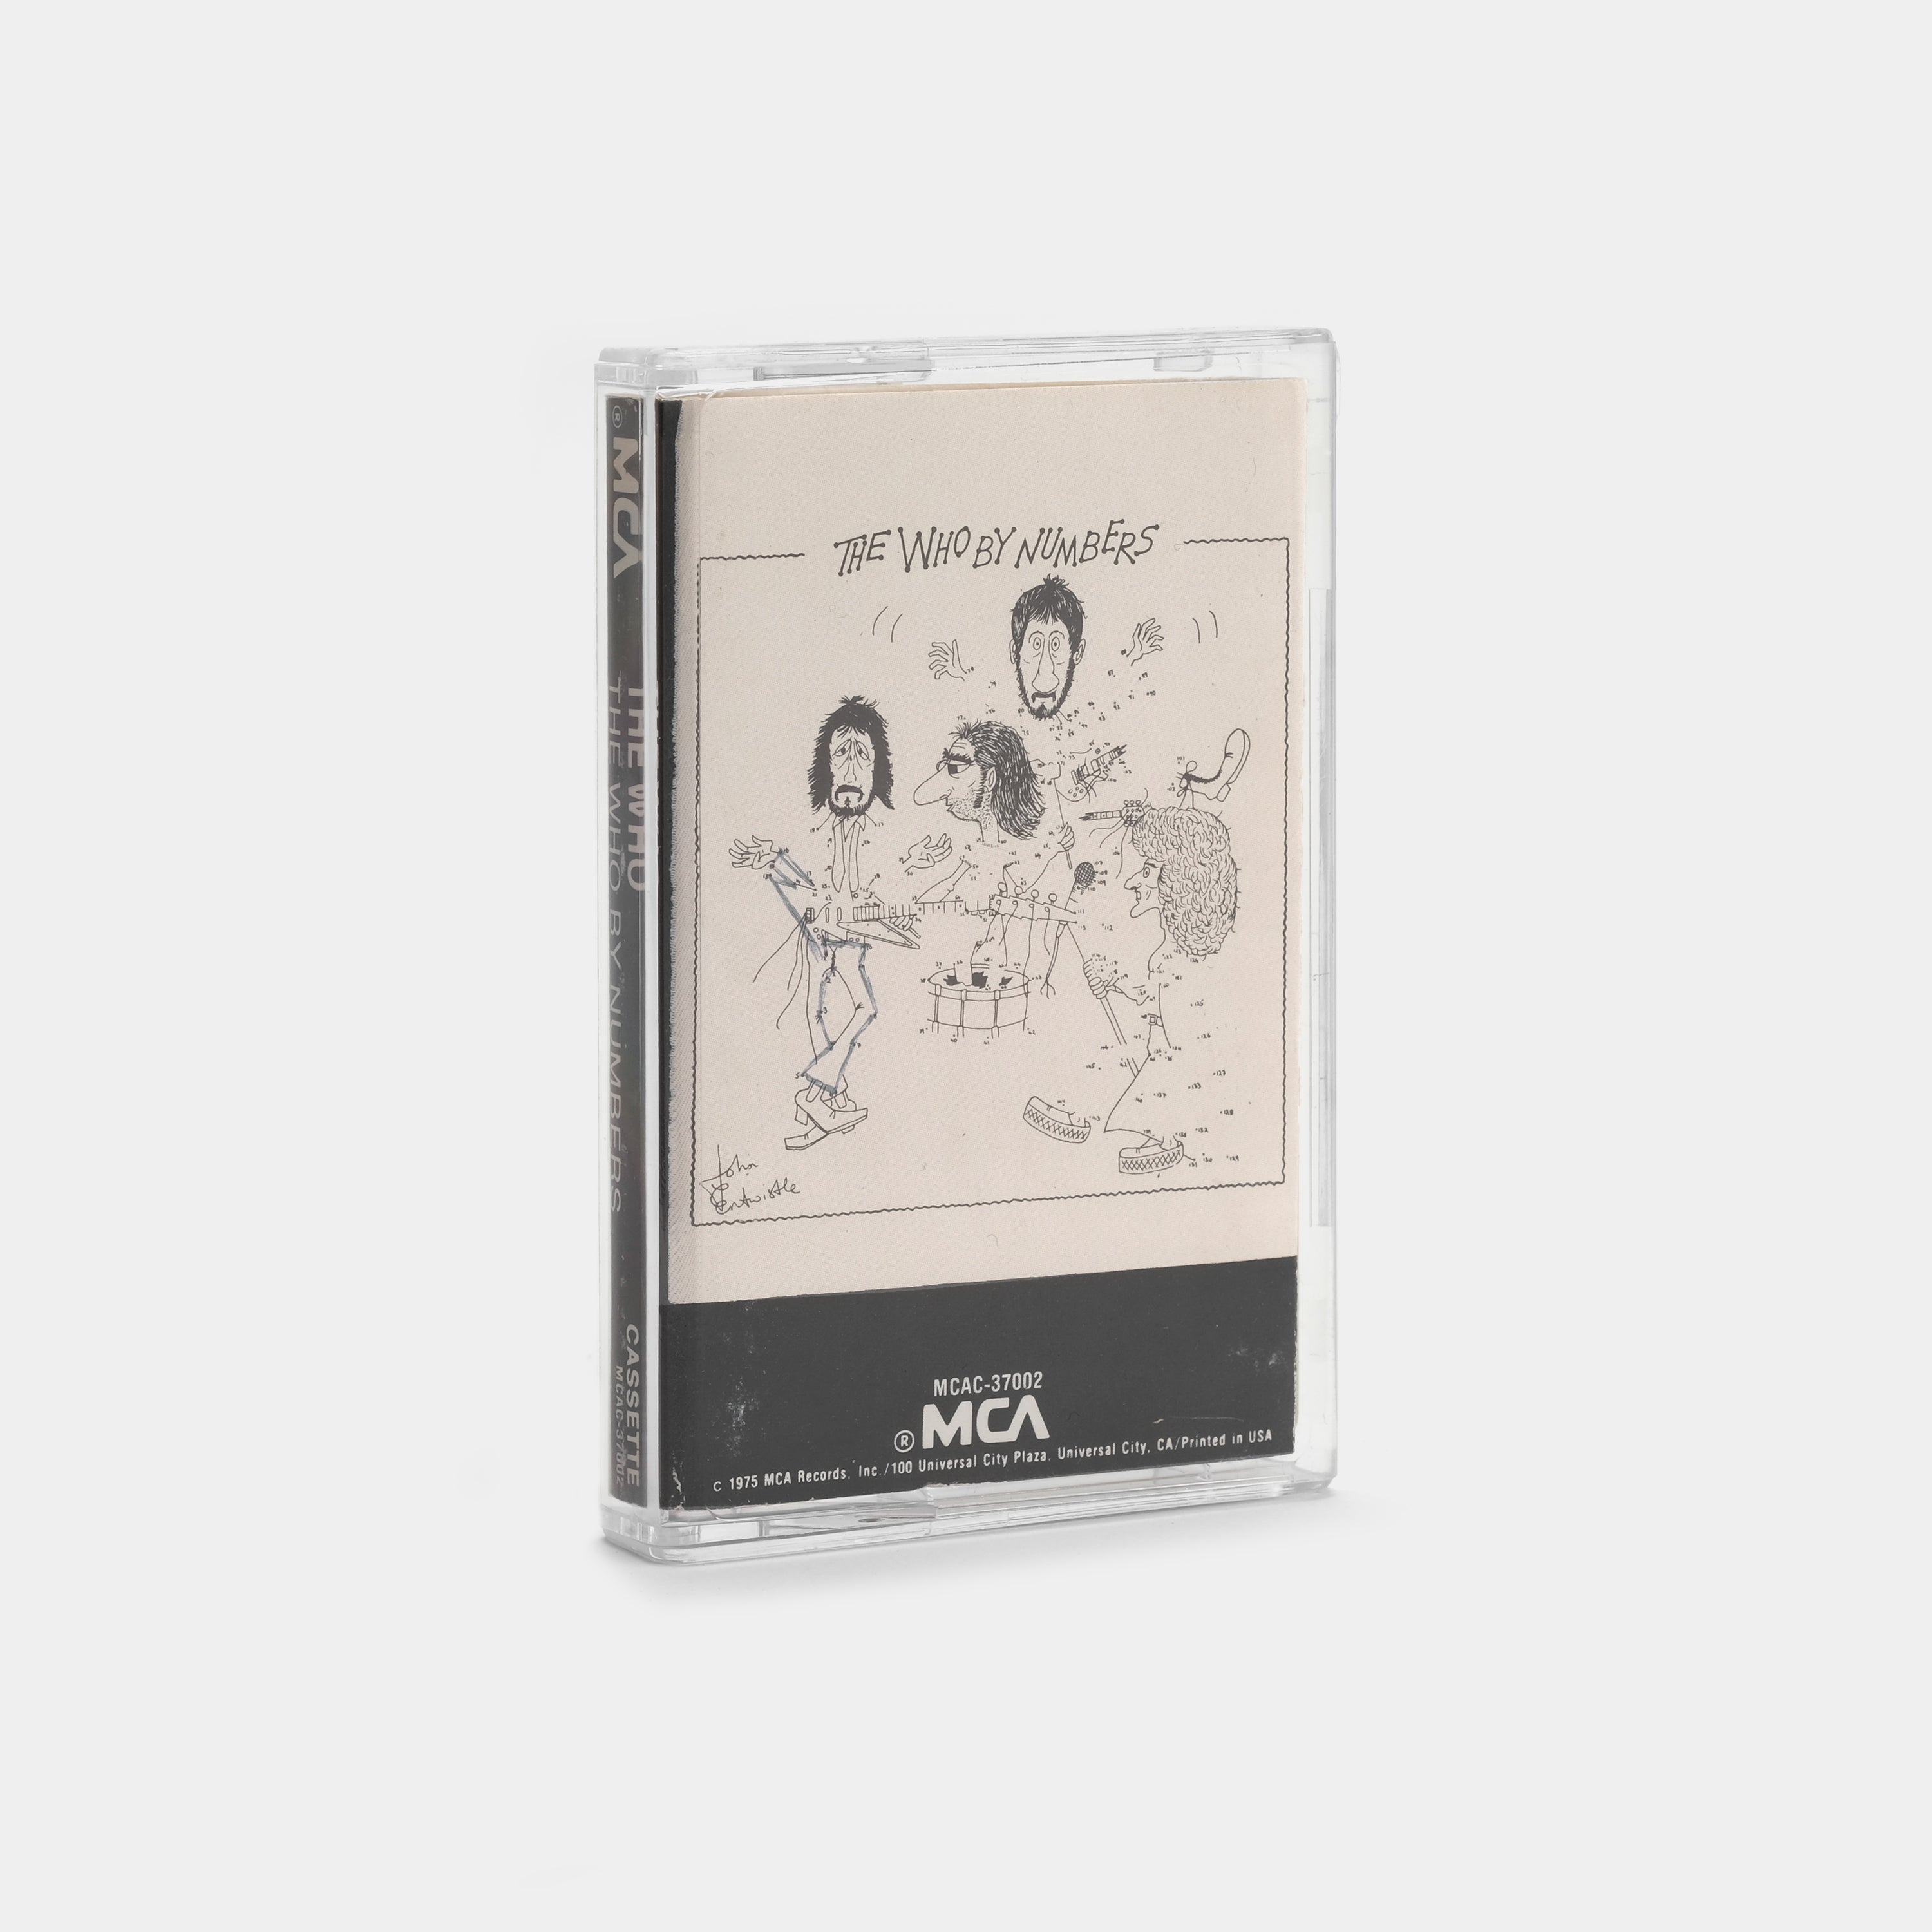 The Who - The Who By Numbers Cassette Tape